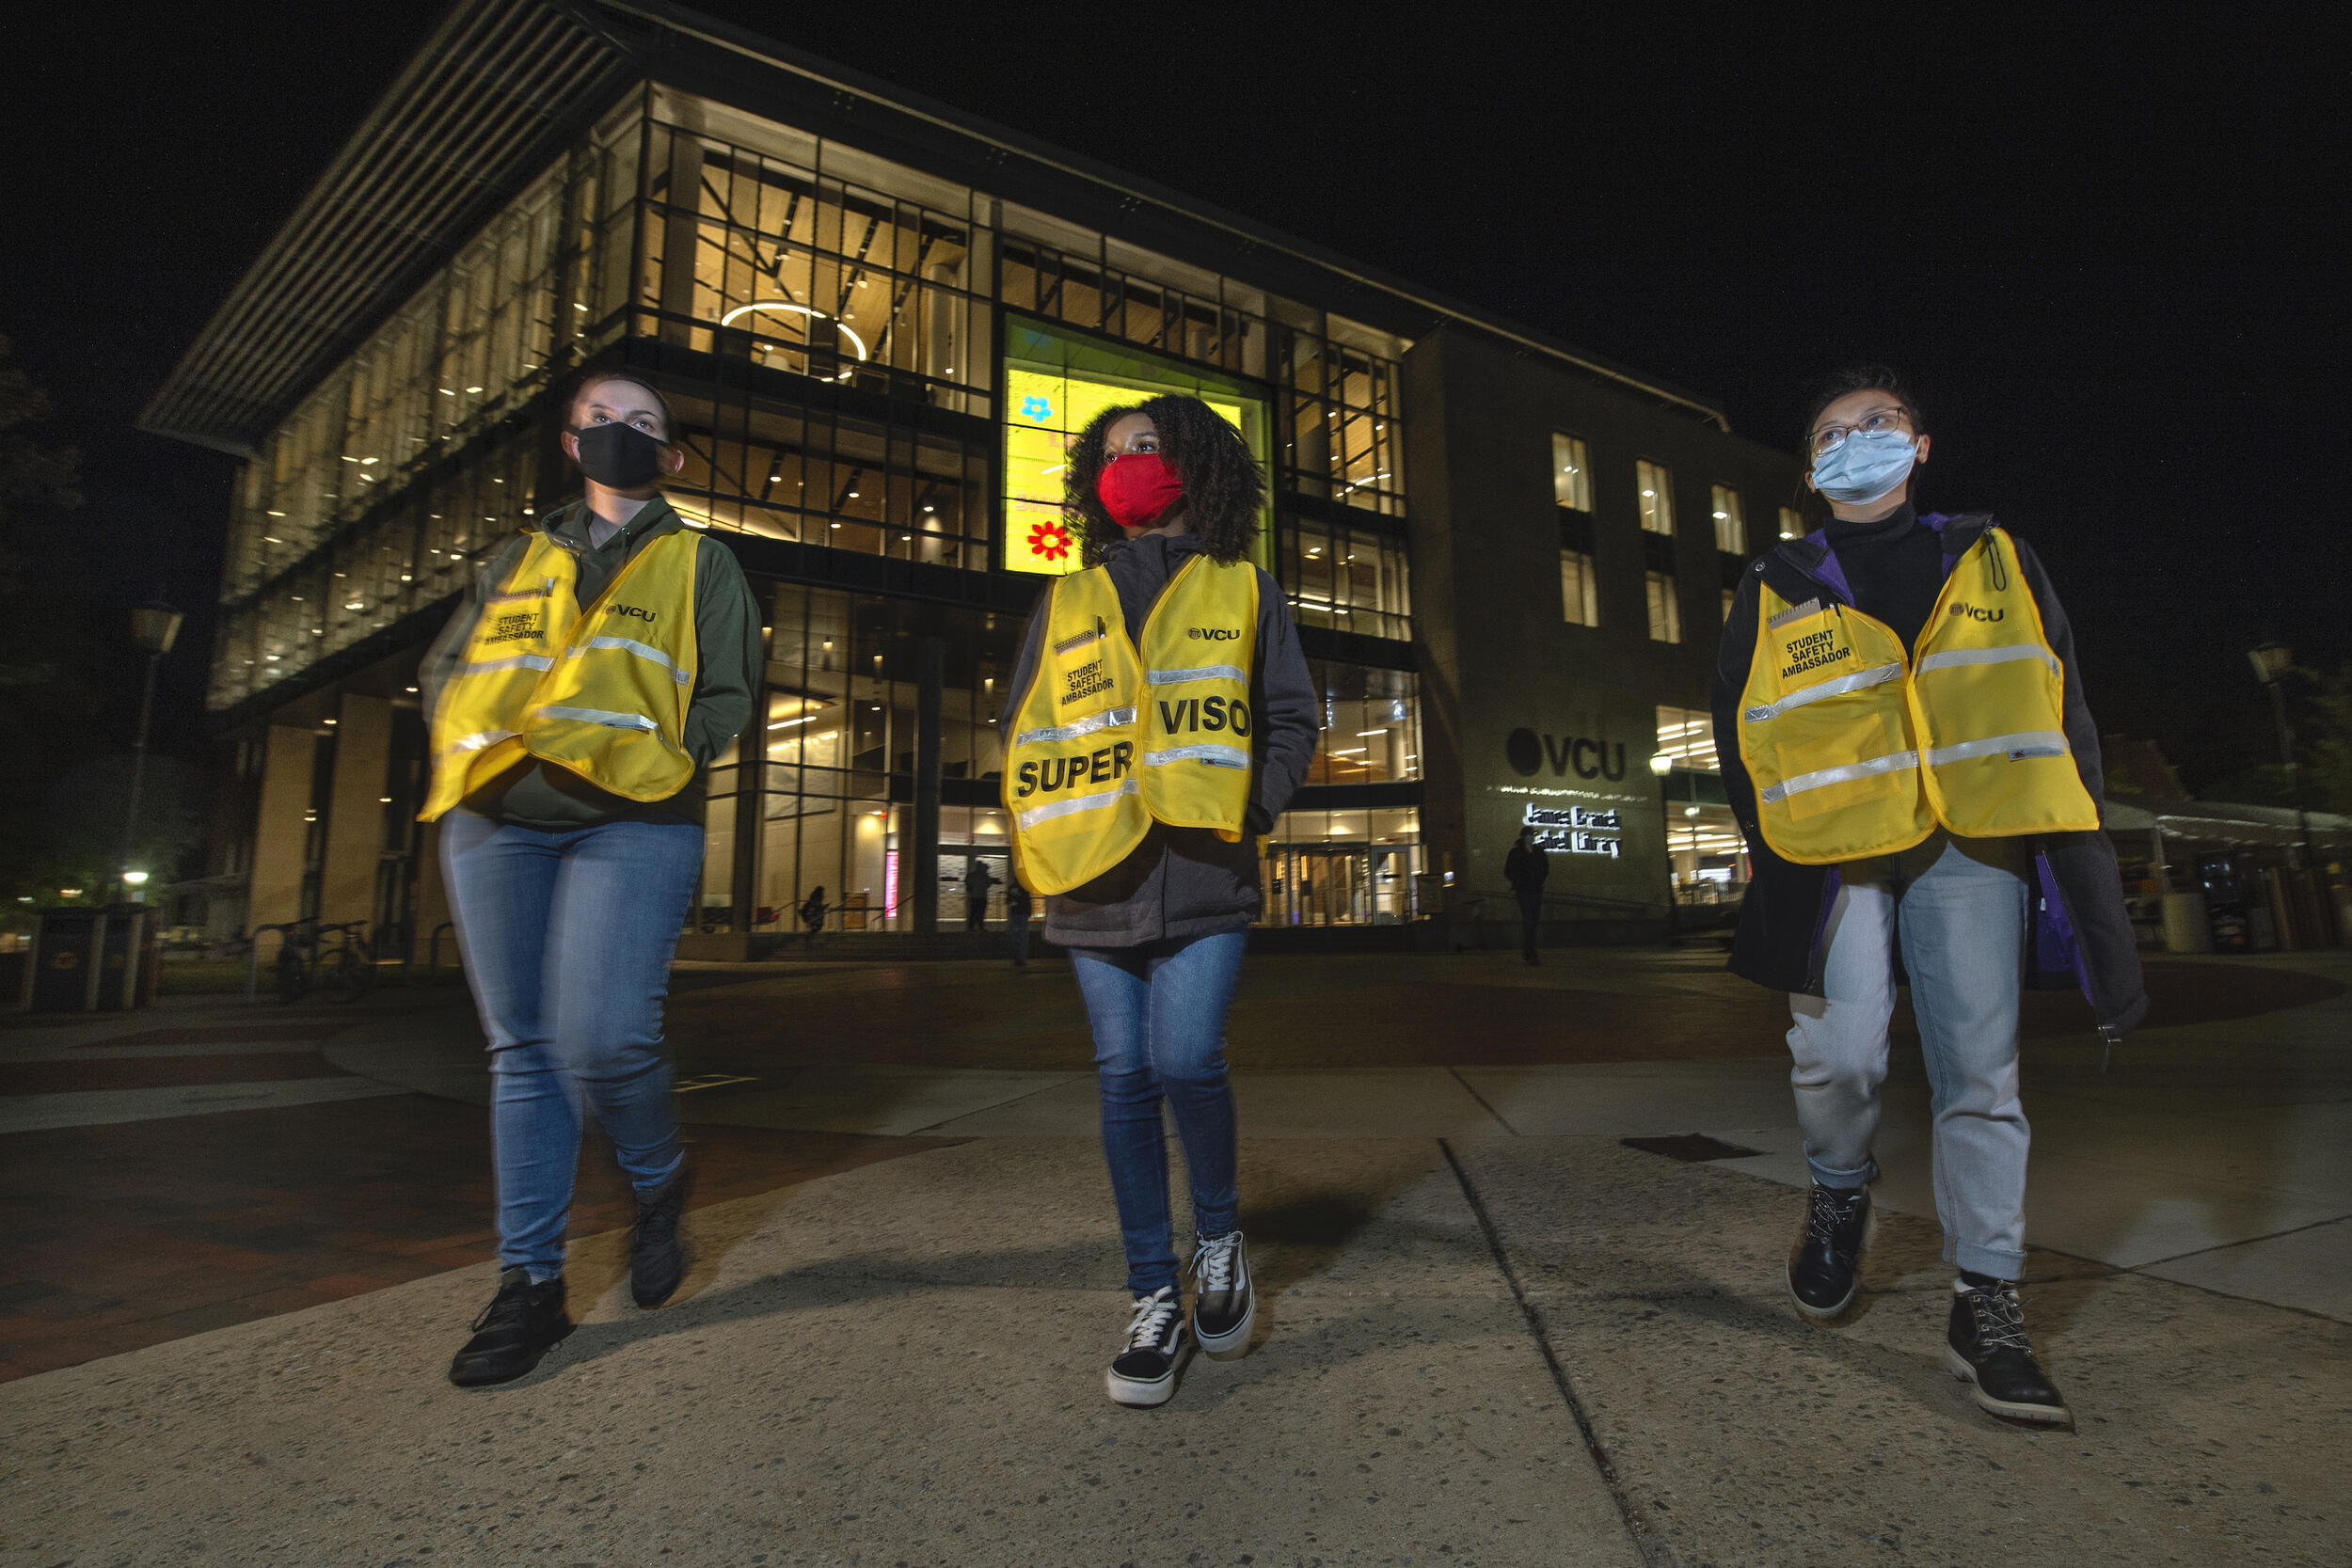 Three students wearing safety vests pictured at night.